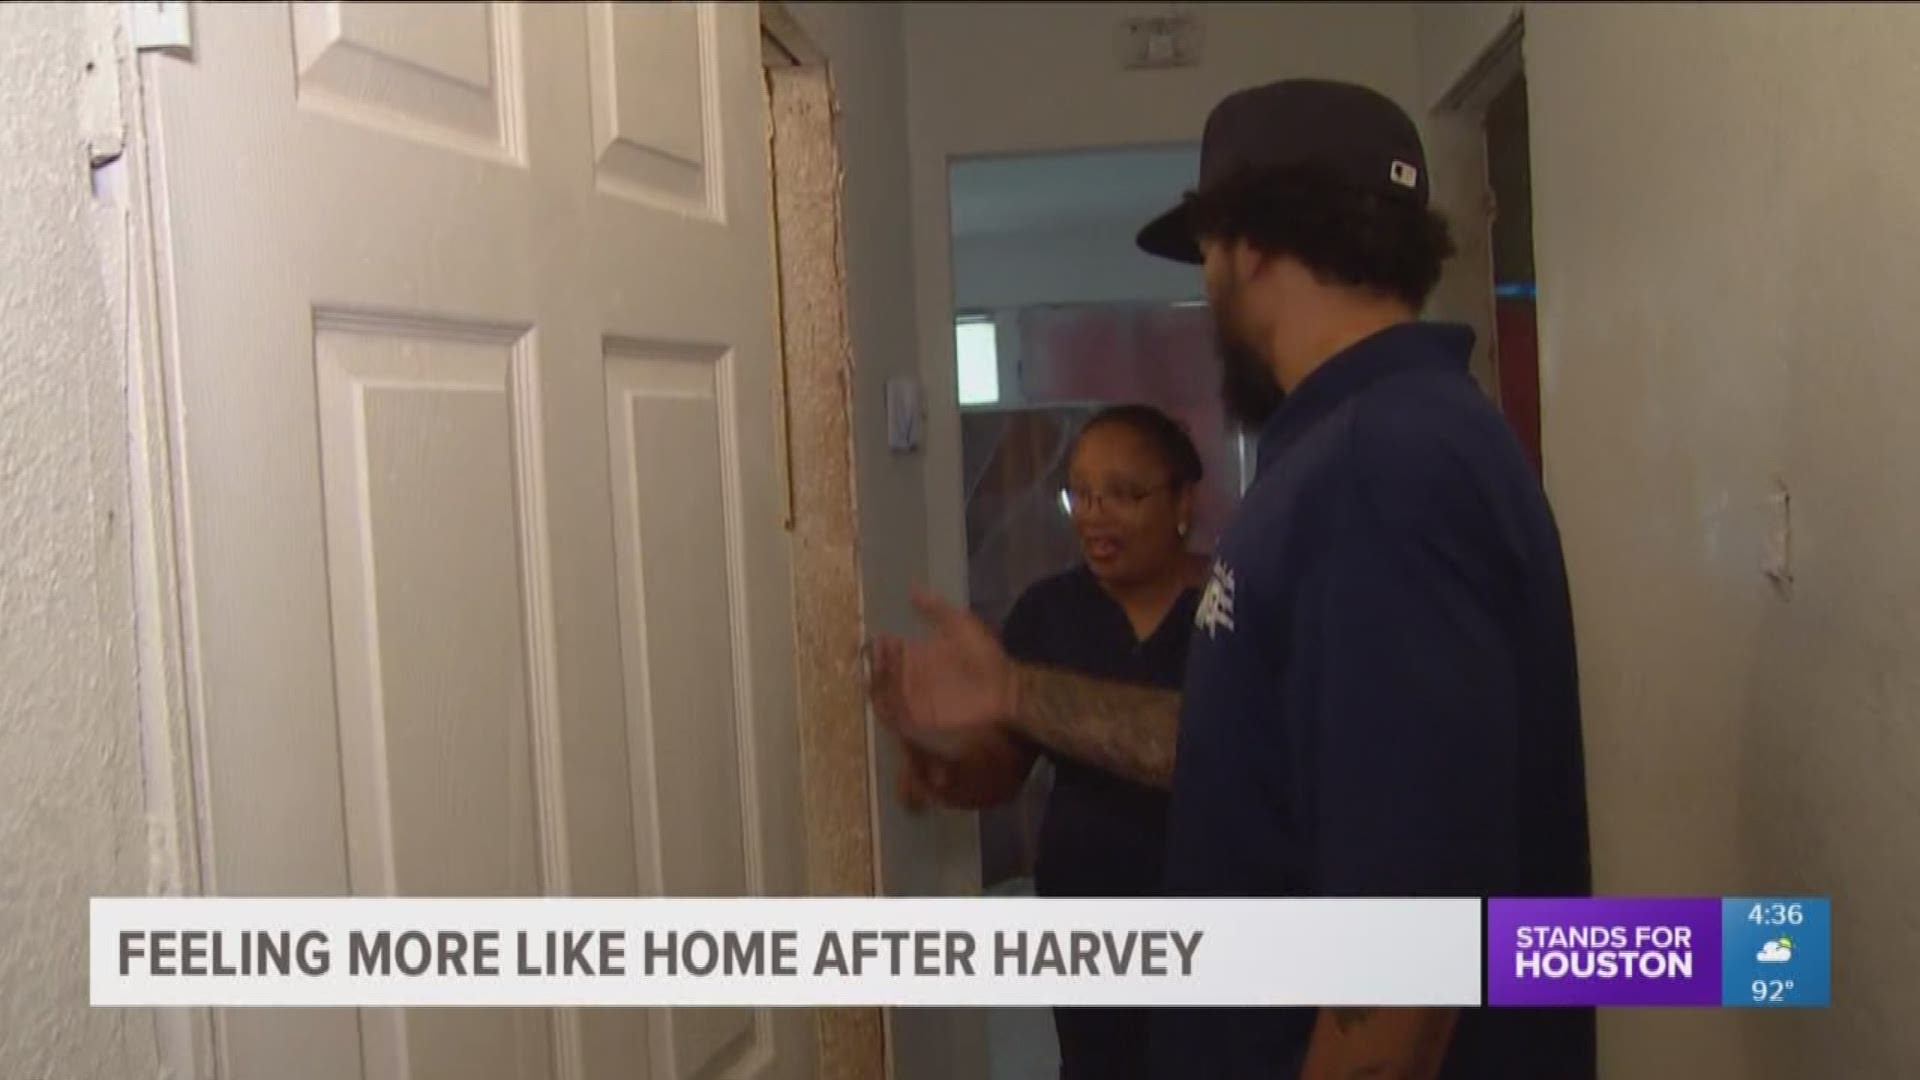 A La Marque family "forgotten after Harvey" is finally seeing much-needed repairs.